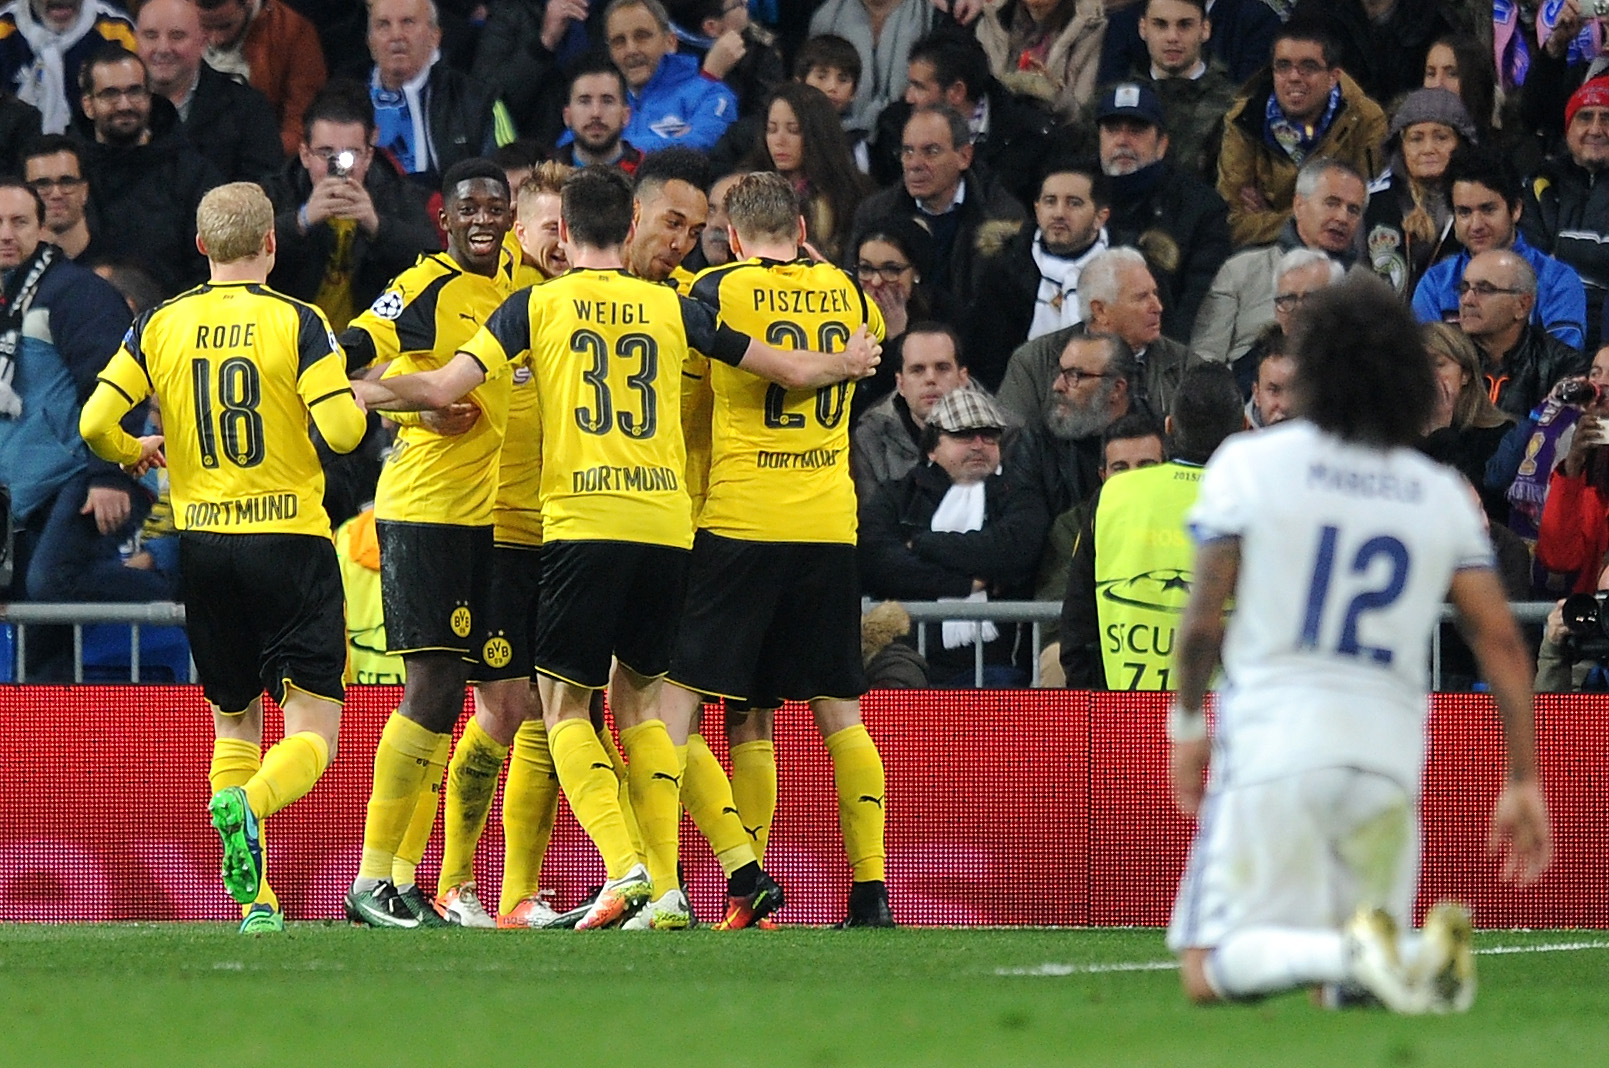 MADRID, SPAIN - DECEMBER 07: Marco Reus of Borussia Dortmund celebrates scoring his sides second goal with his Borussia Dortmund team mates during the UEFA Champions League Group F match between Real Madrid CF and Borussia Dortmund at the Bernabeu on December 7, 2016 in Madrid, Spain.  (Photo by Denis Doyle/Getty Images)